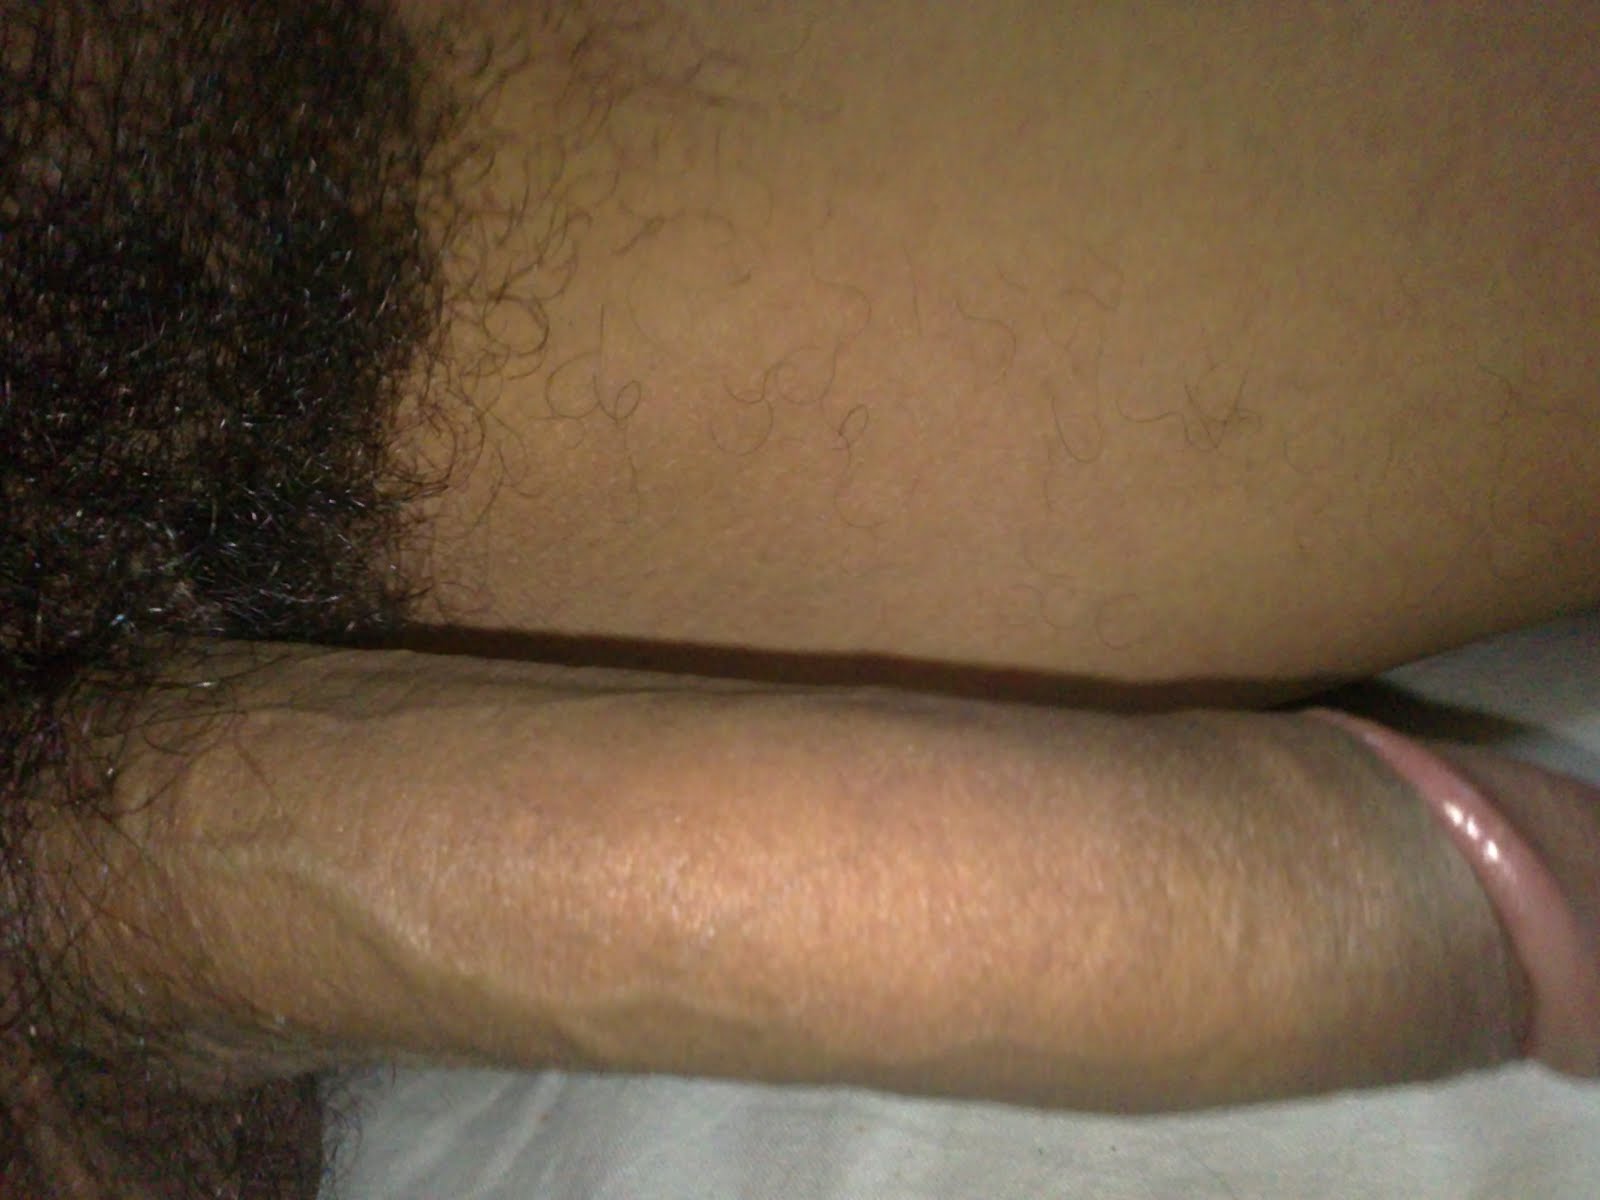 Indian penis nudes